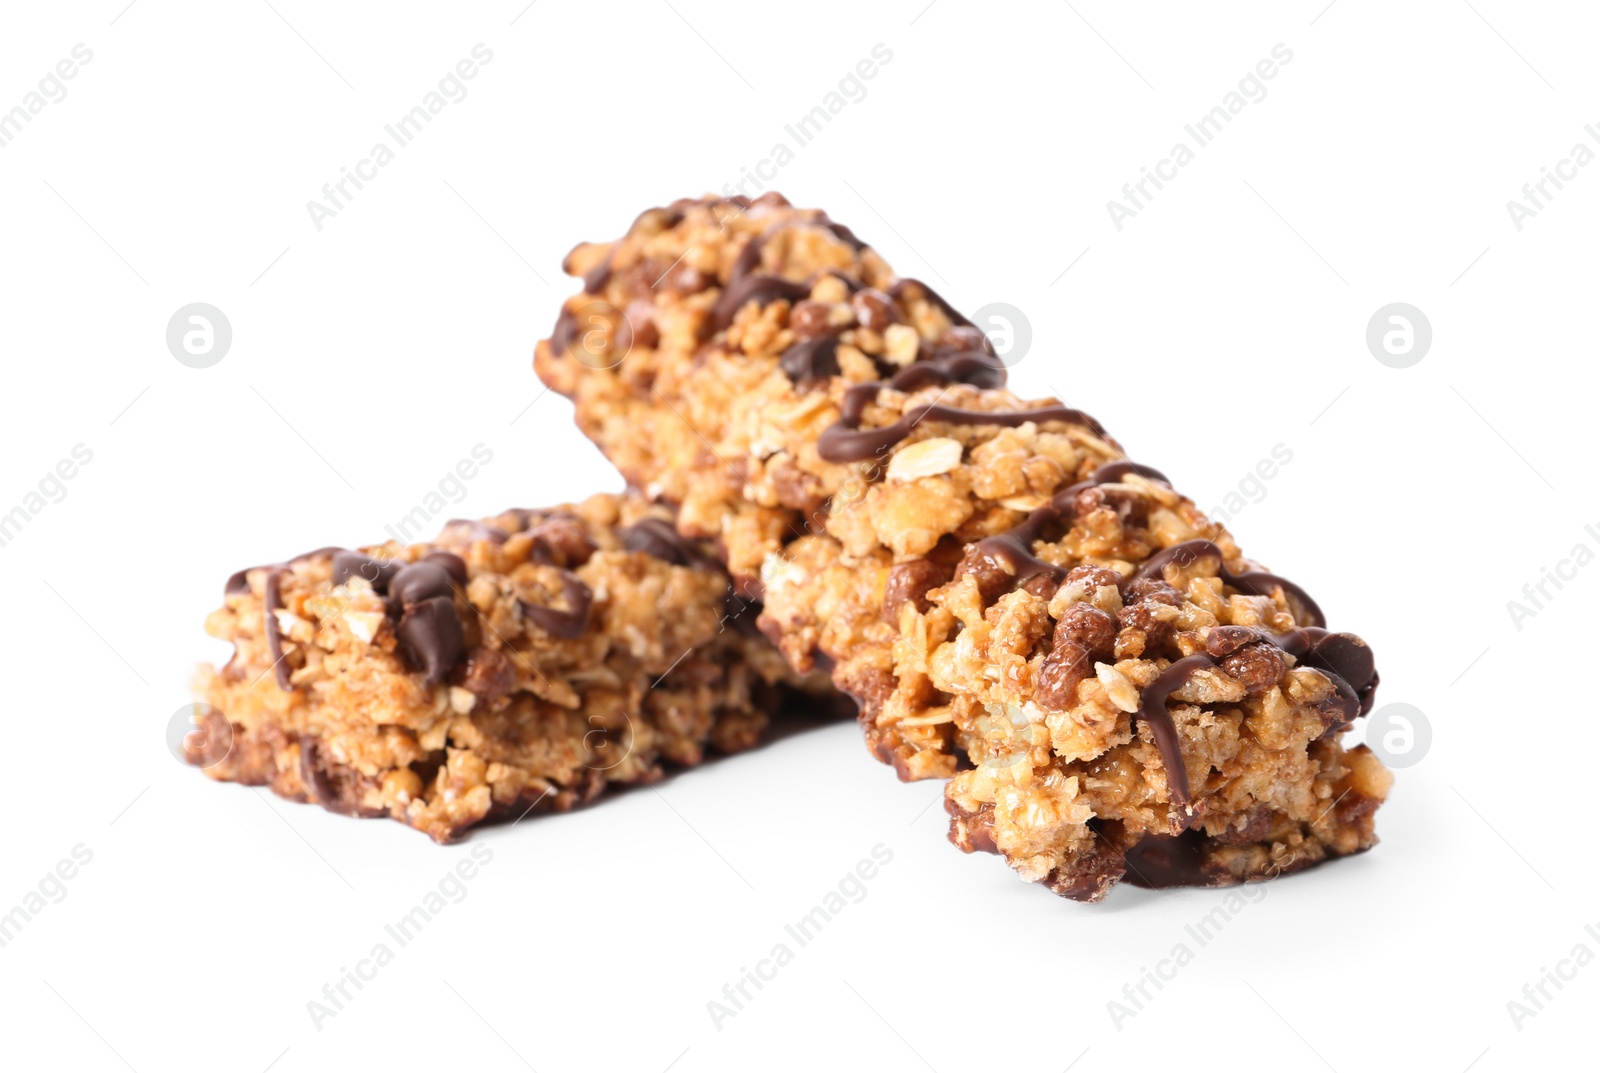 Image of Crunchy granola bars with chocolate on white background